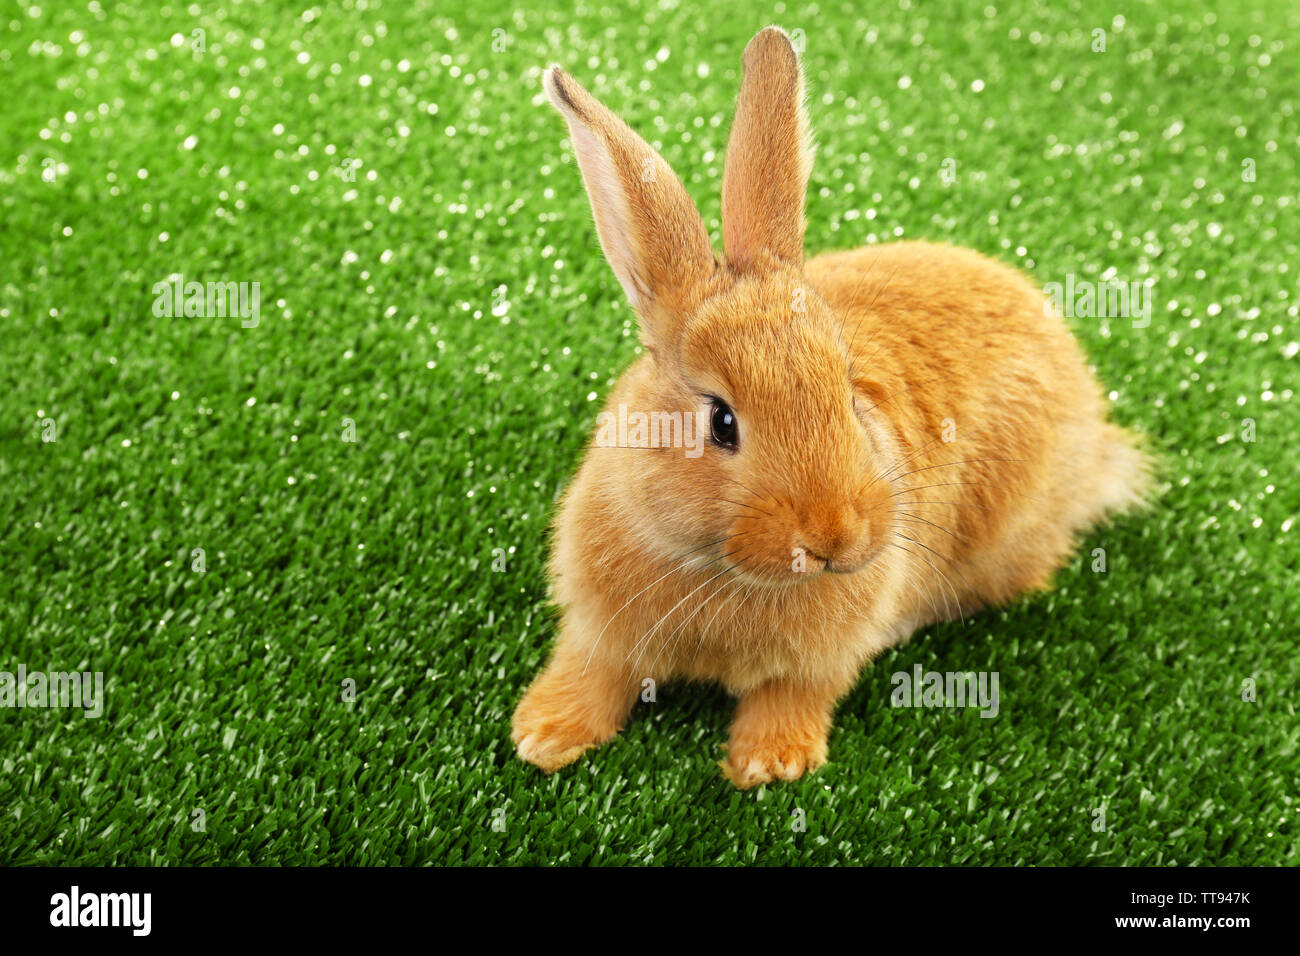 Cute brown rabbit on green grass background Stock Photo